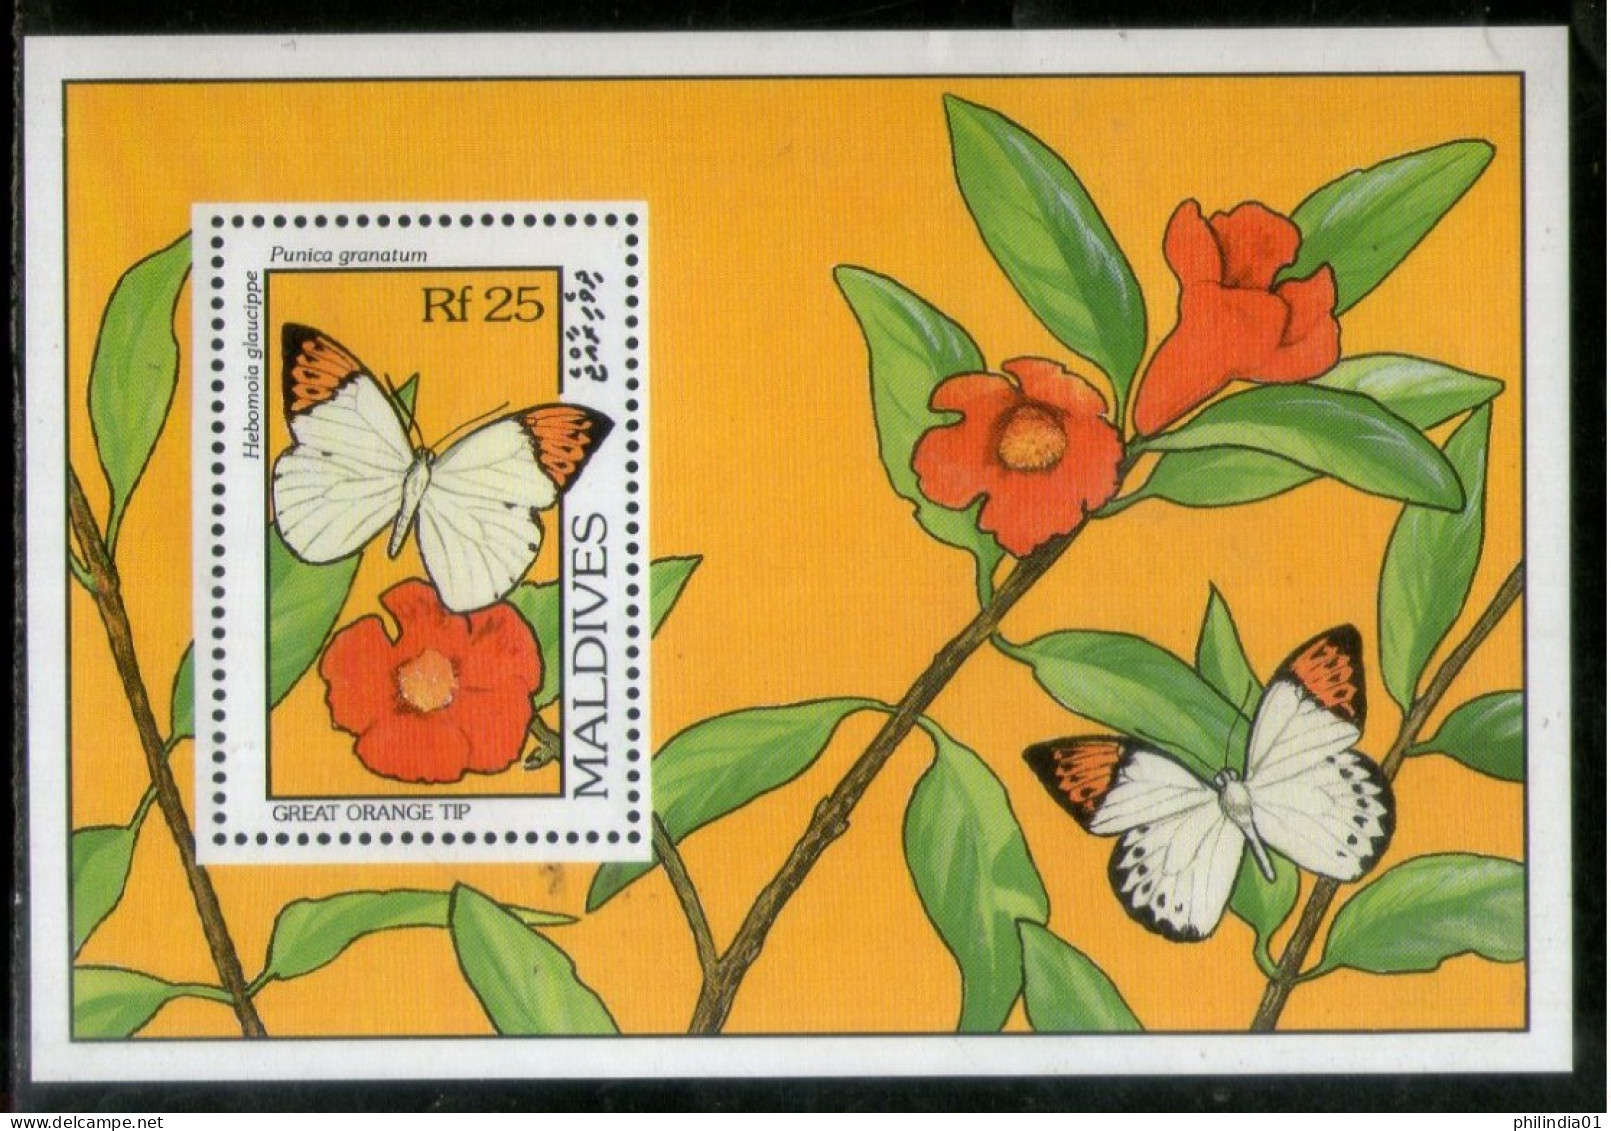 Maldives 1993 Great Orange Tip Butterflies & Flowers Moth Insect Sc 1906 M/s MNH # 5843 - Vlinders